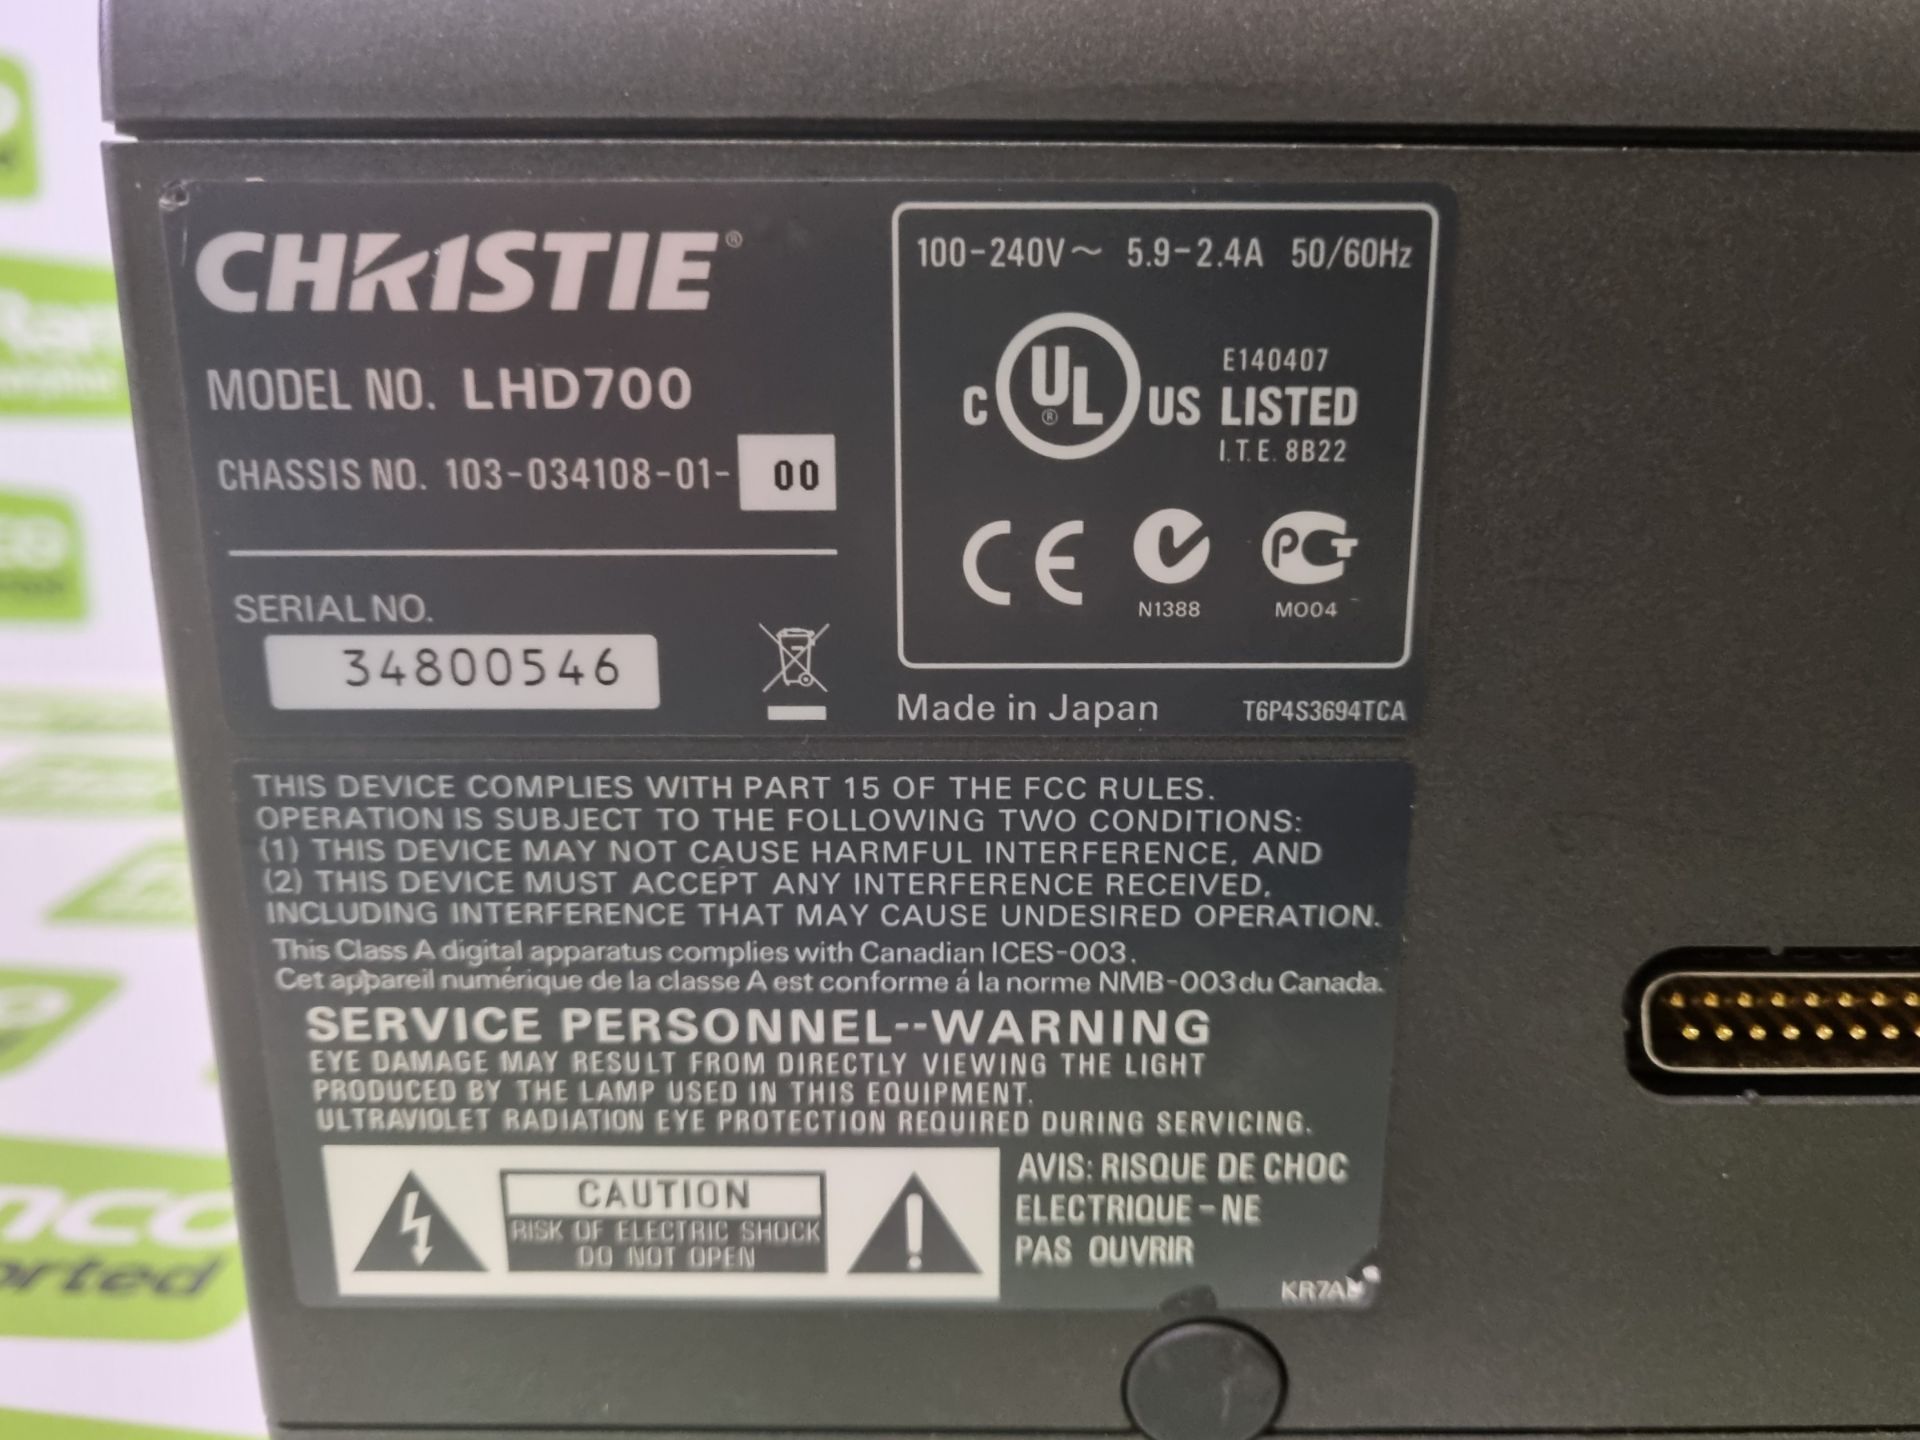 Christie LHD700 Digital projector, 3LCD Full HDl large venue 1080P 7,000 lumens & Flight case - Image 4 of 9